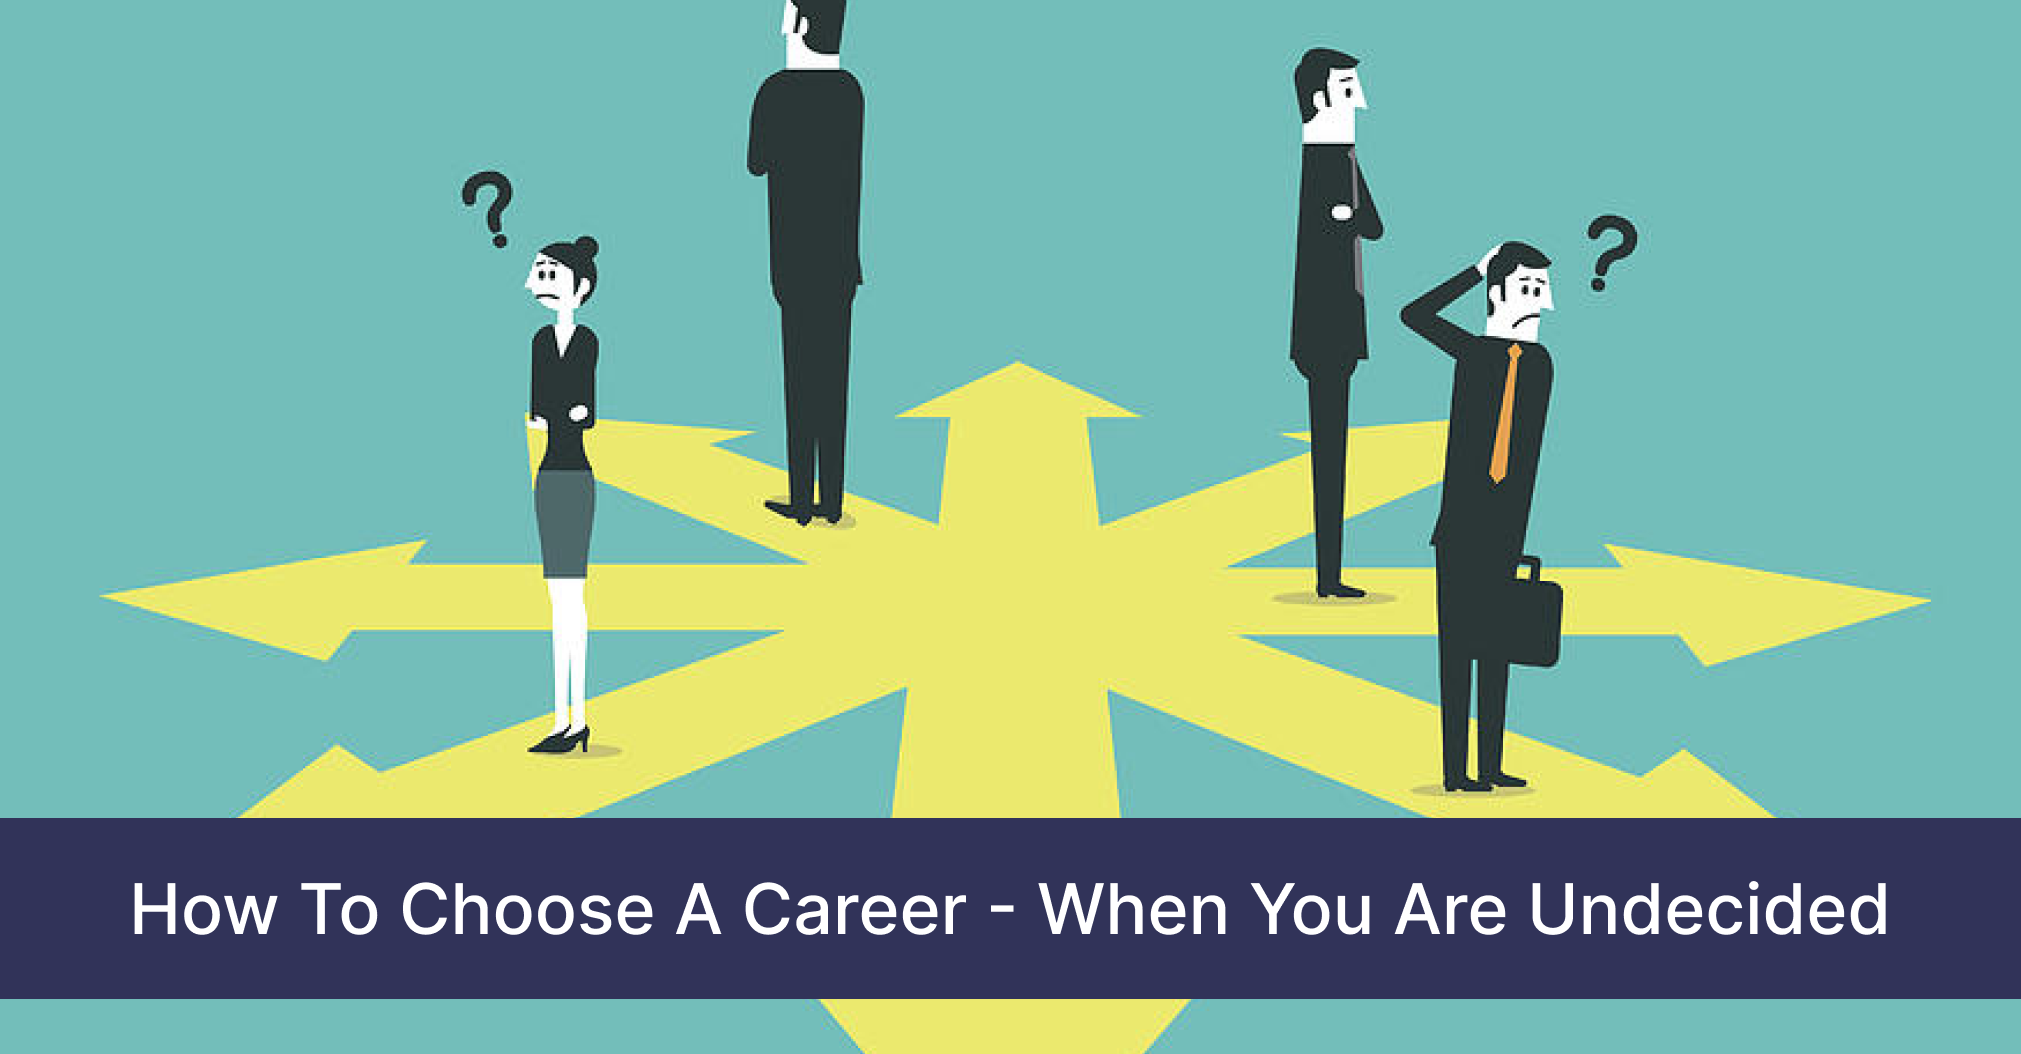 How-To-Choose-A-Career-When-You-Are-Undecided